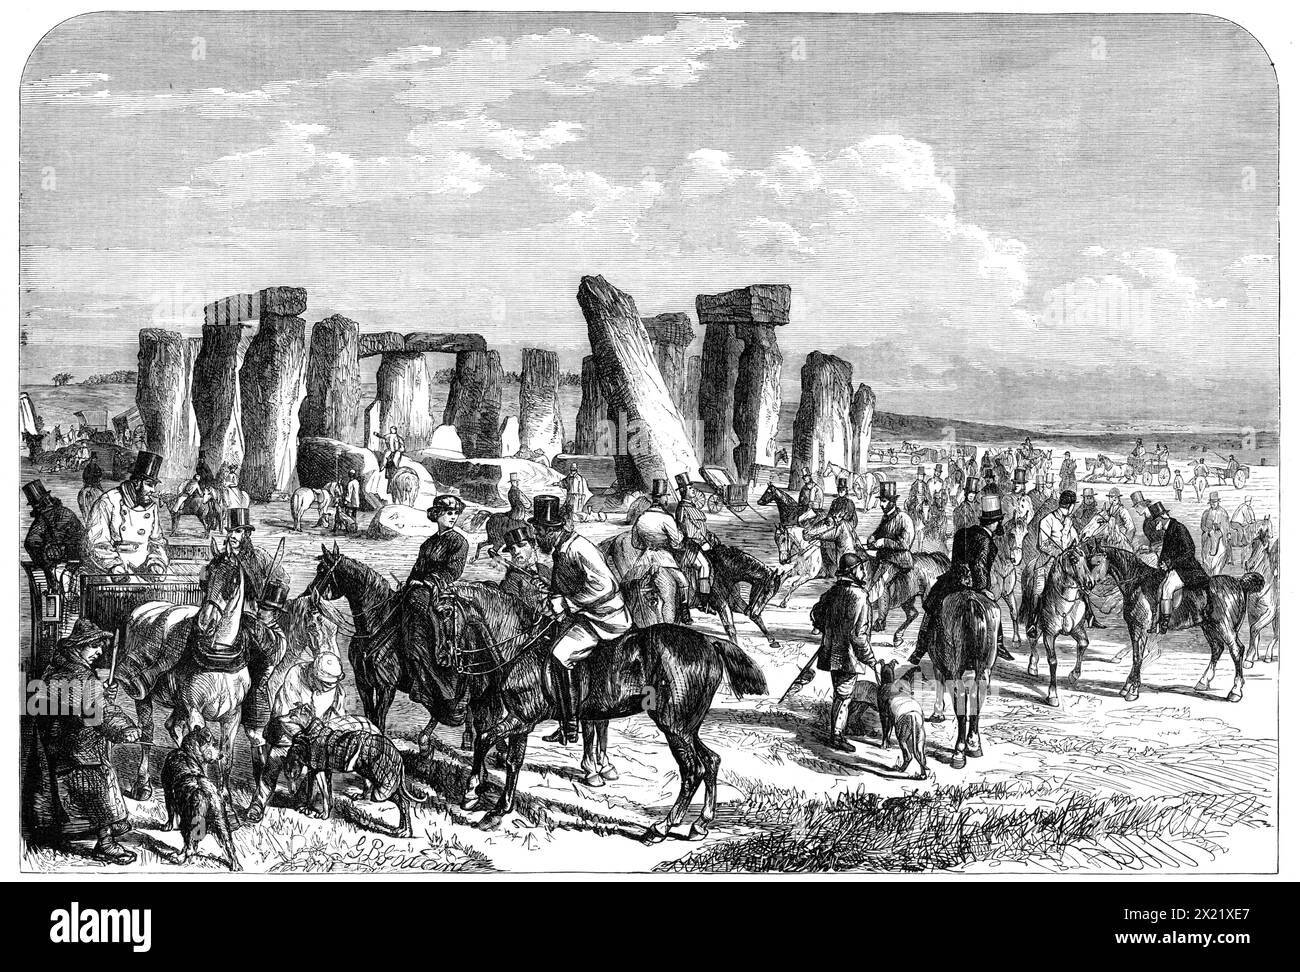 The Wiltshire Champion Coursing Meeting at Stonehenge, 1865. Engraving of a sketch by Mr. G. B. Goddard, representing '...the trysting-place for the coursers on one or two mornings during &quot;the Champion week.&quot; Stonehenge, that pile of ambres or holy stones, is a great mystery. Some aver that they were brought by Merlin's aid from Scythia's shore by the great Pendragon, and others that they were raised by Danish chiefs in honour of the Idol of Victory. Be this as it may, the shepherds and the [hare] coursers share them now...The recent meeting was very well attended, and nine stakes we Stock Photo